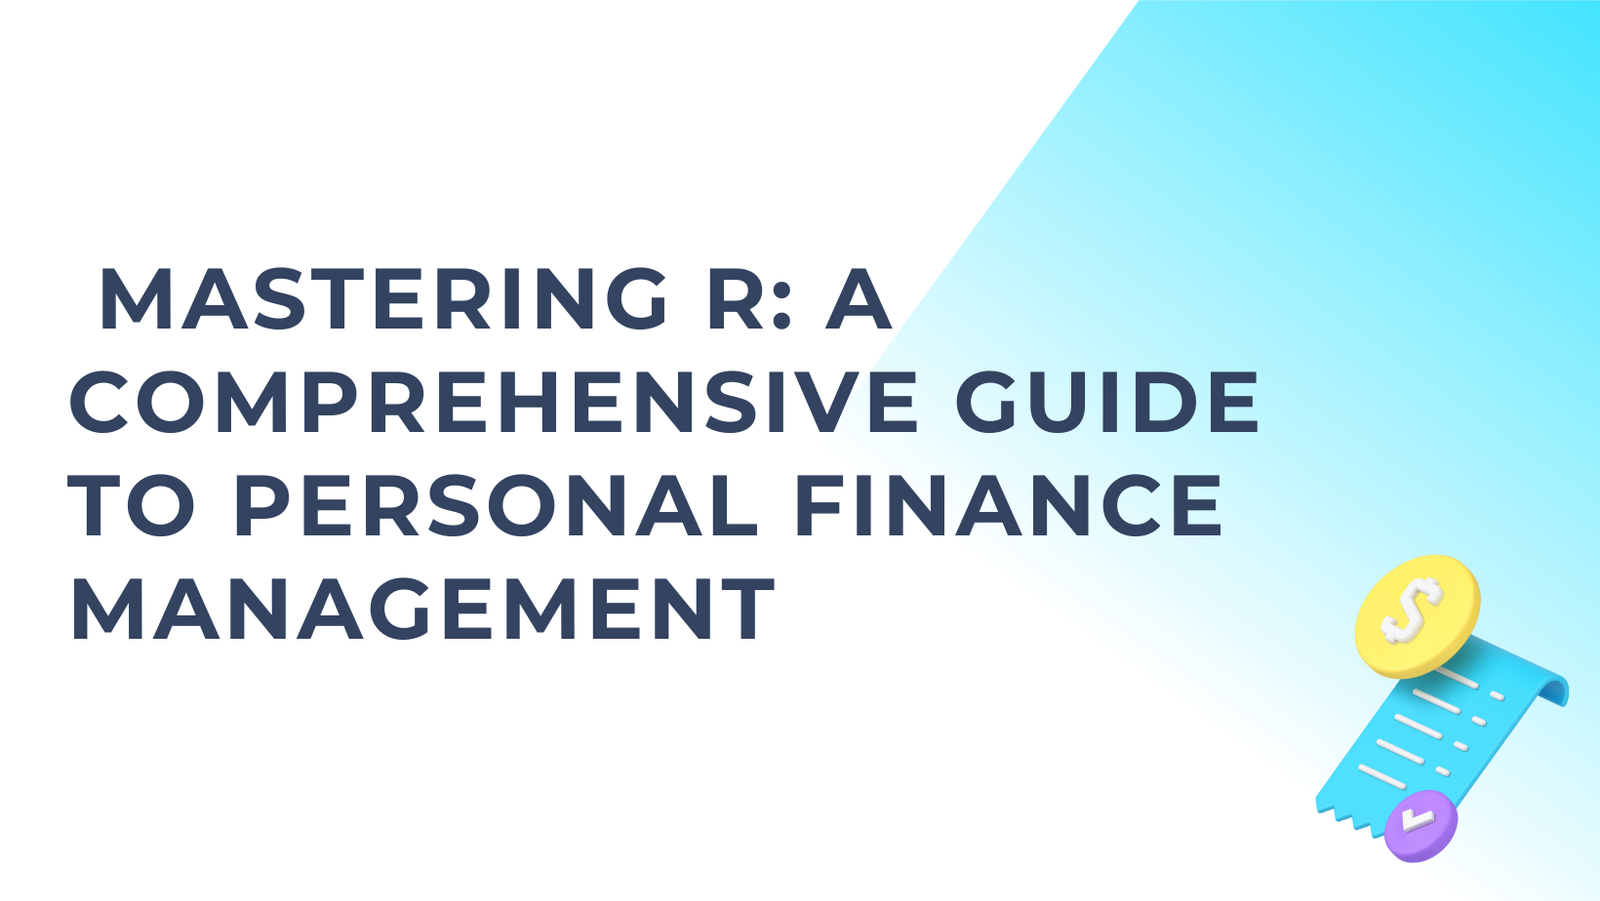 Mastering R: A Comprehensive Guide to Personal Finance Management